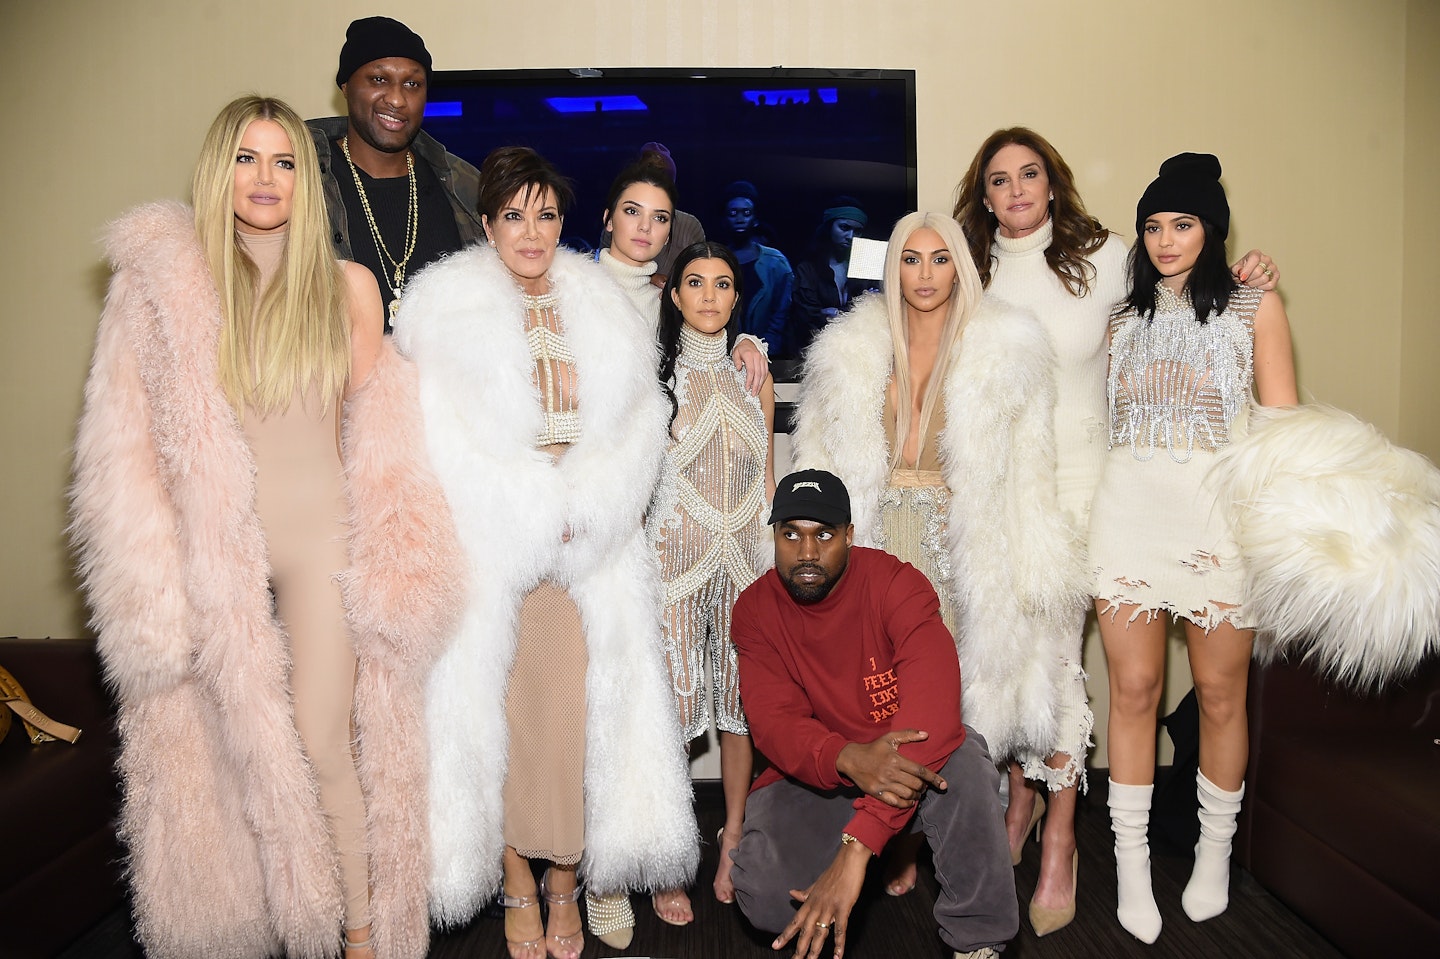 The Kardashian family with Kanye West and Lamar Odom